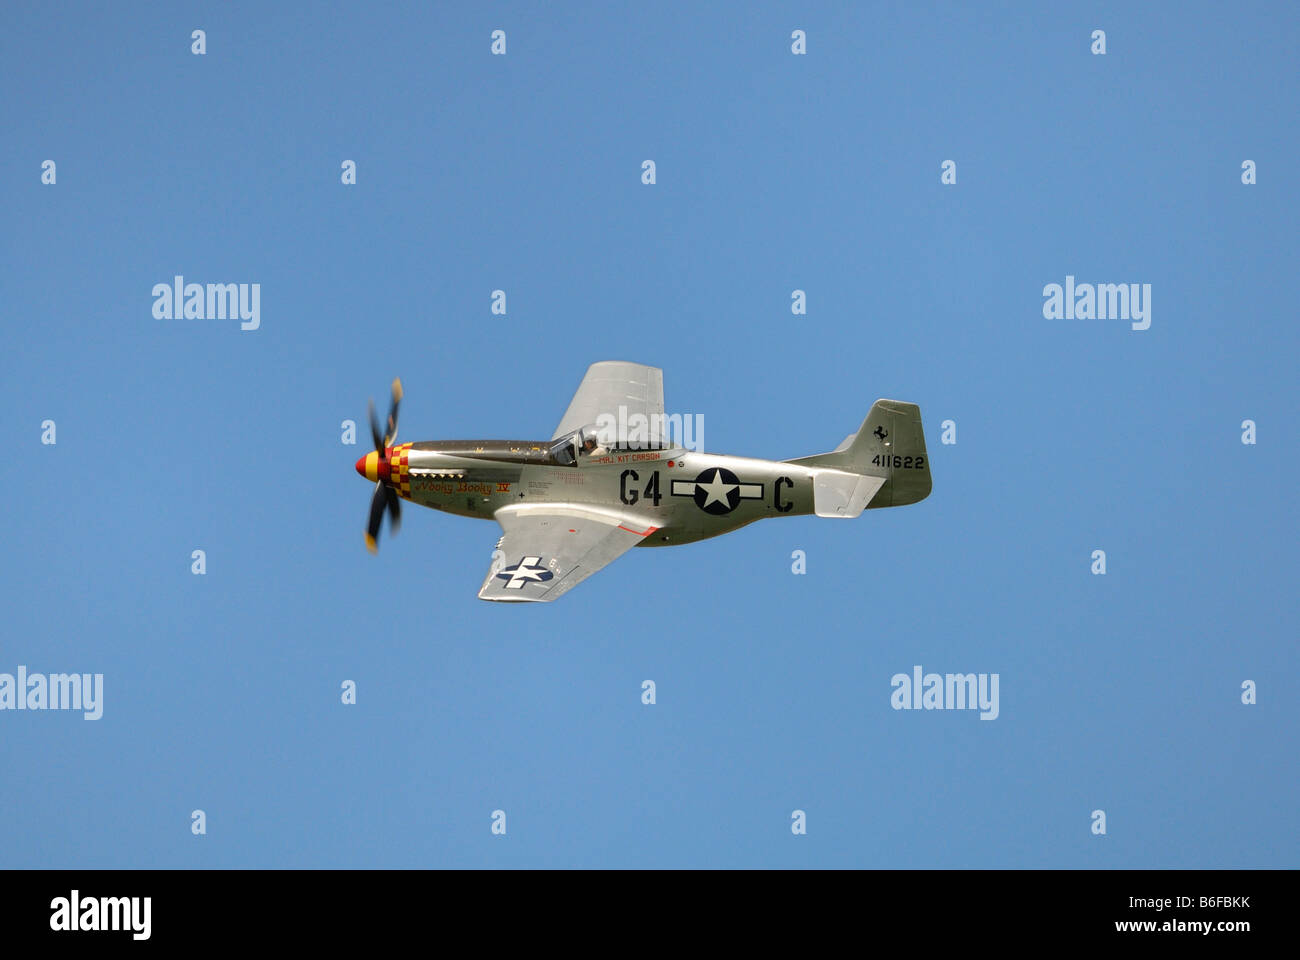 Legendary American fighter aircraft, North American P-51 Mustang, flying by at low-altitude Stock Photo